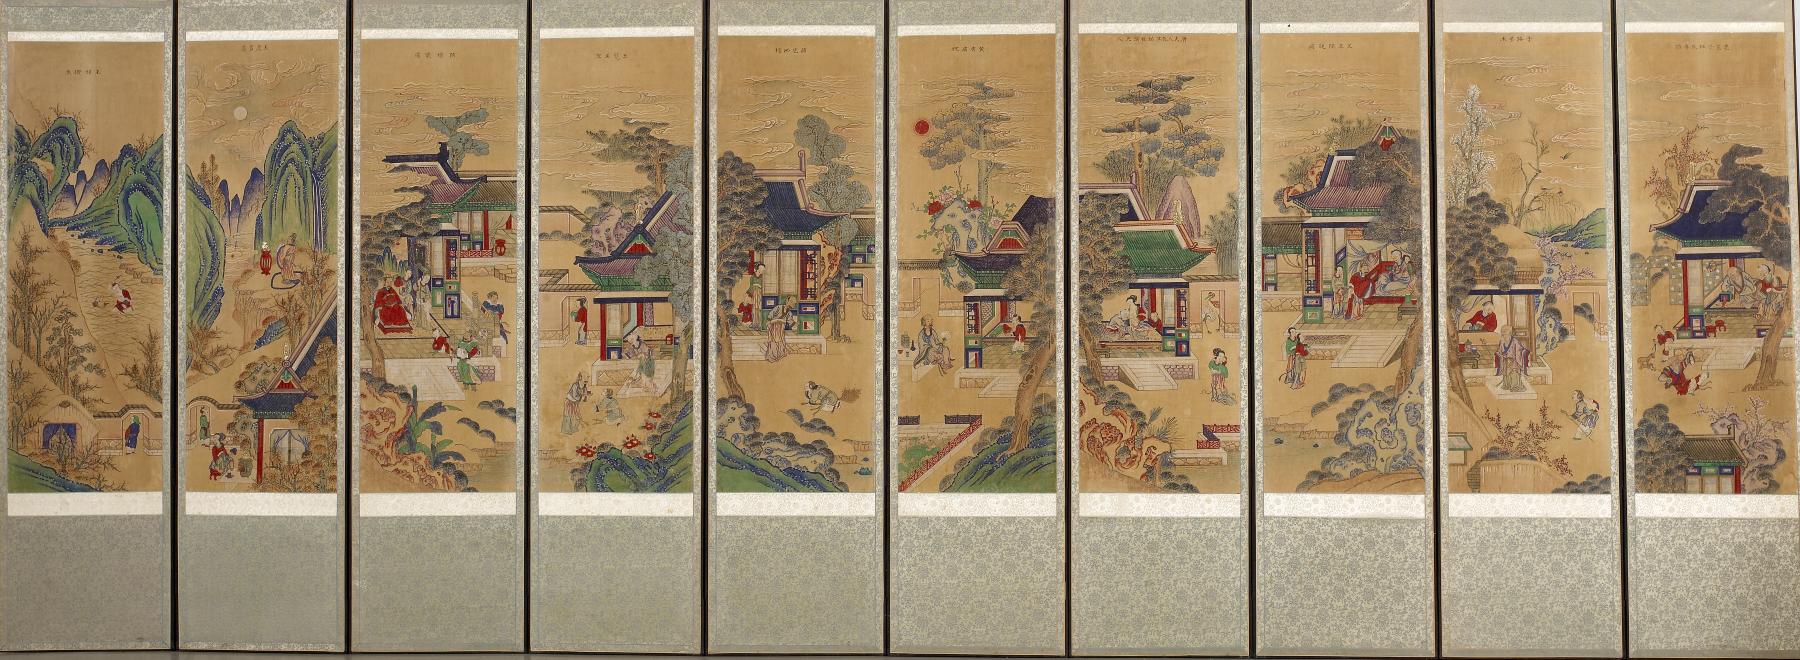 Image for Ten-panel Folding Screen with Scenes of Filial Piety